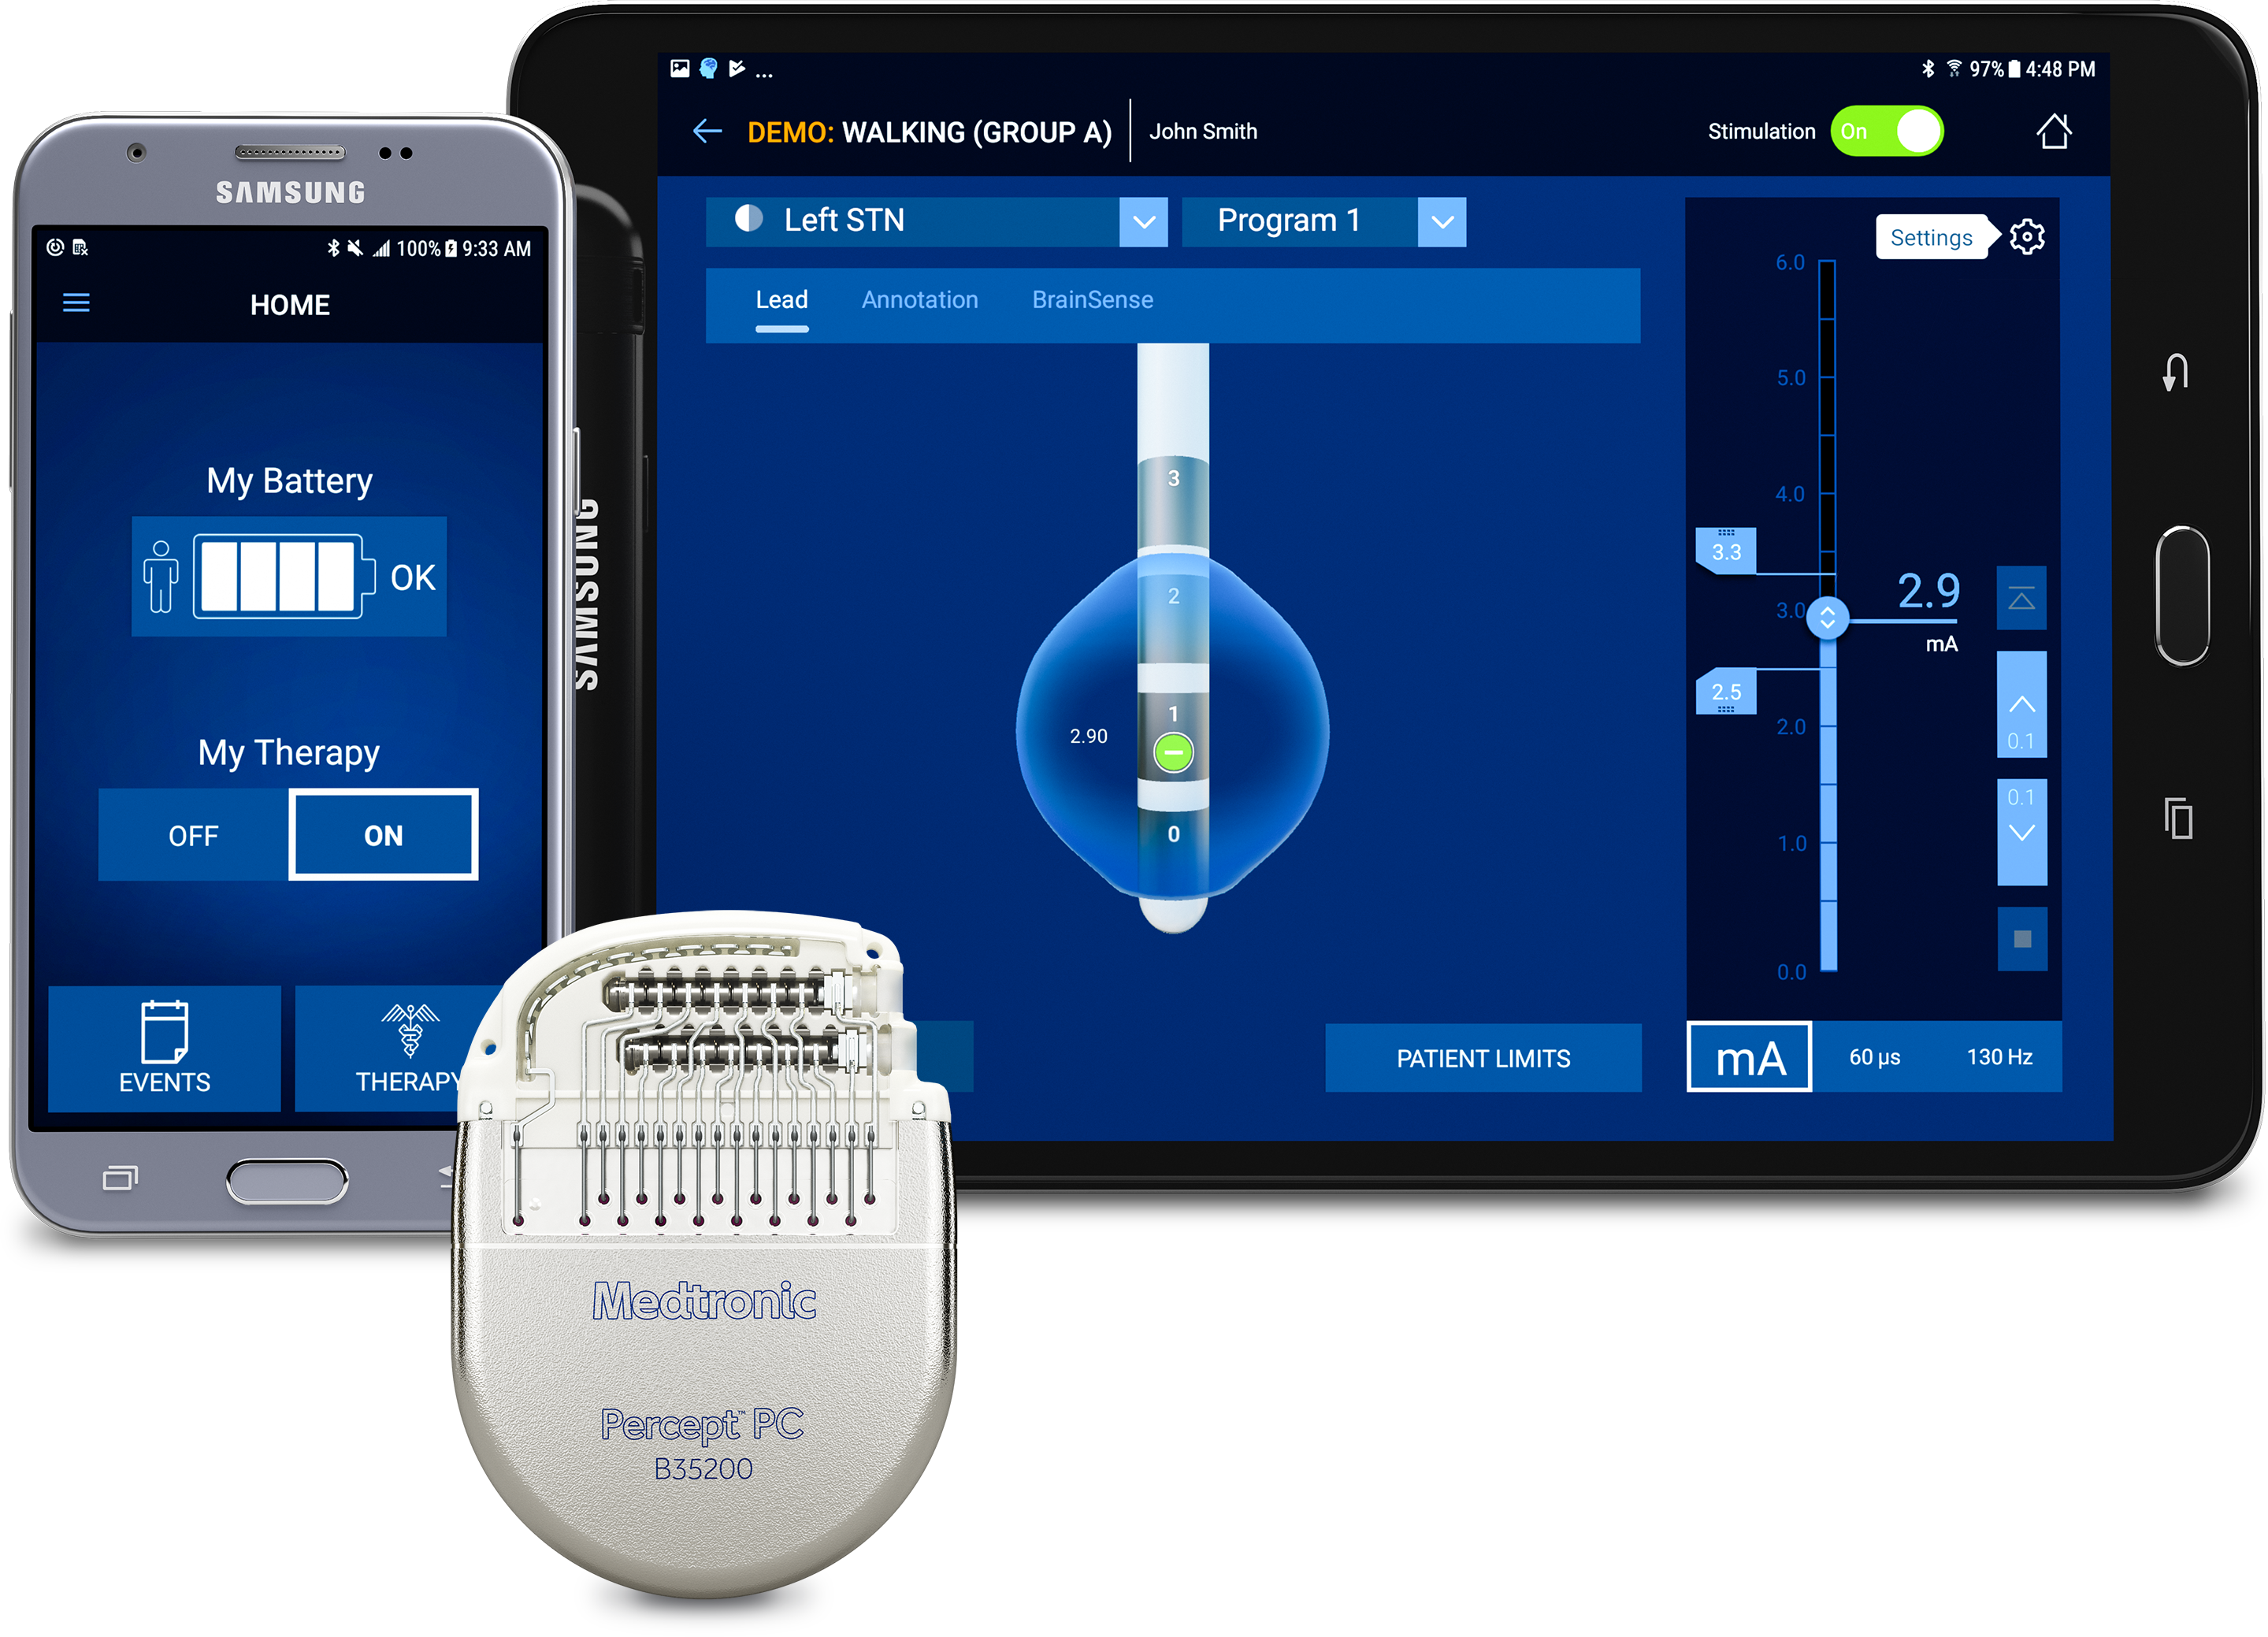 Medtronic Receives CE Mark Approval for the Percept™ PC Neurostimulator DBS  System with BrainSense™ Technology NYSE:MDT